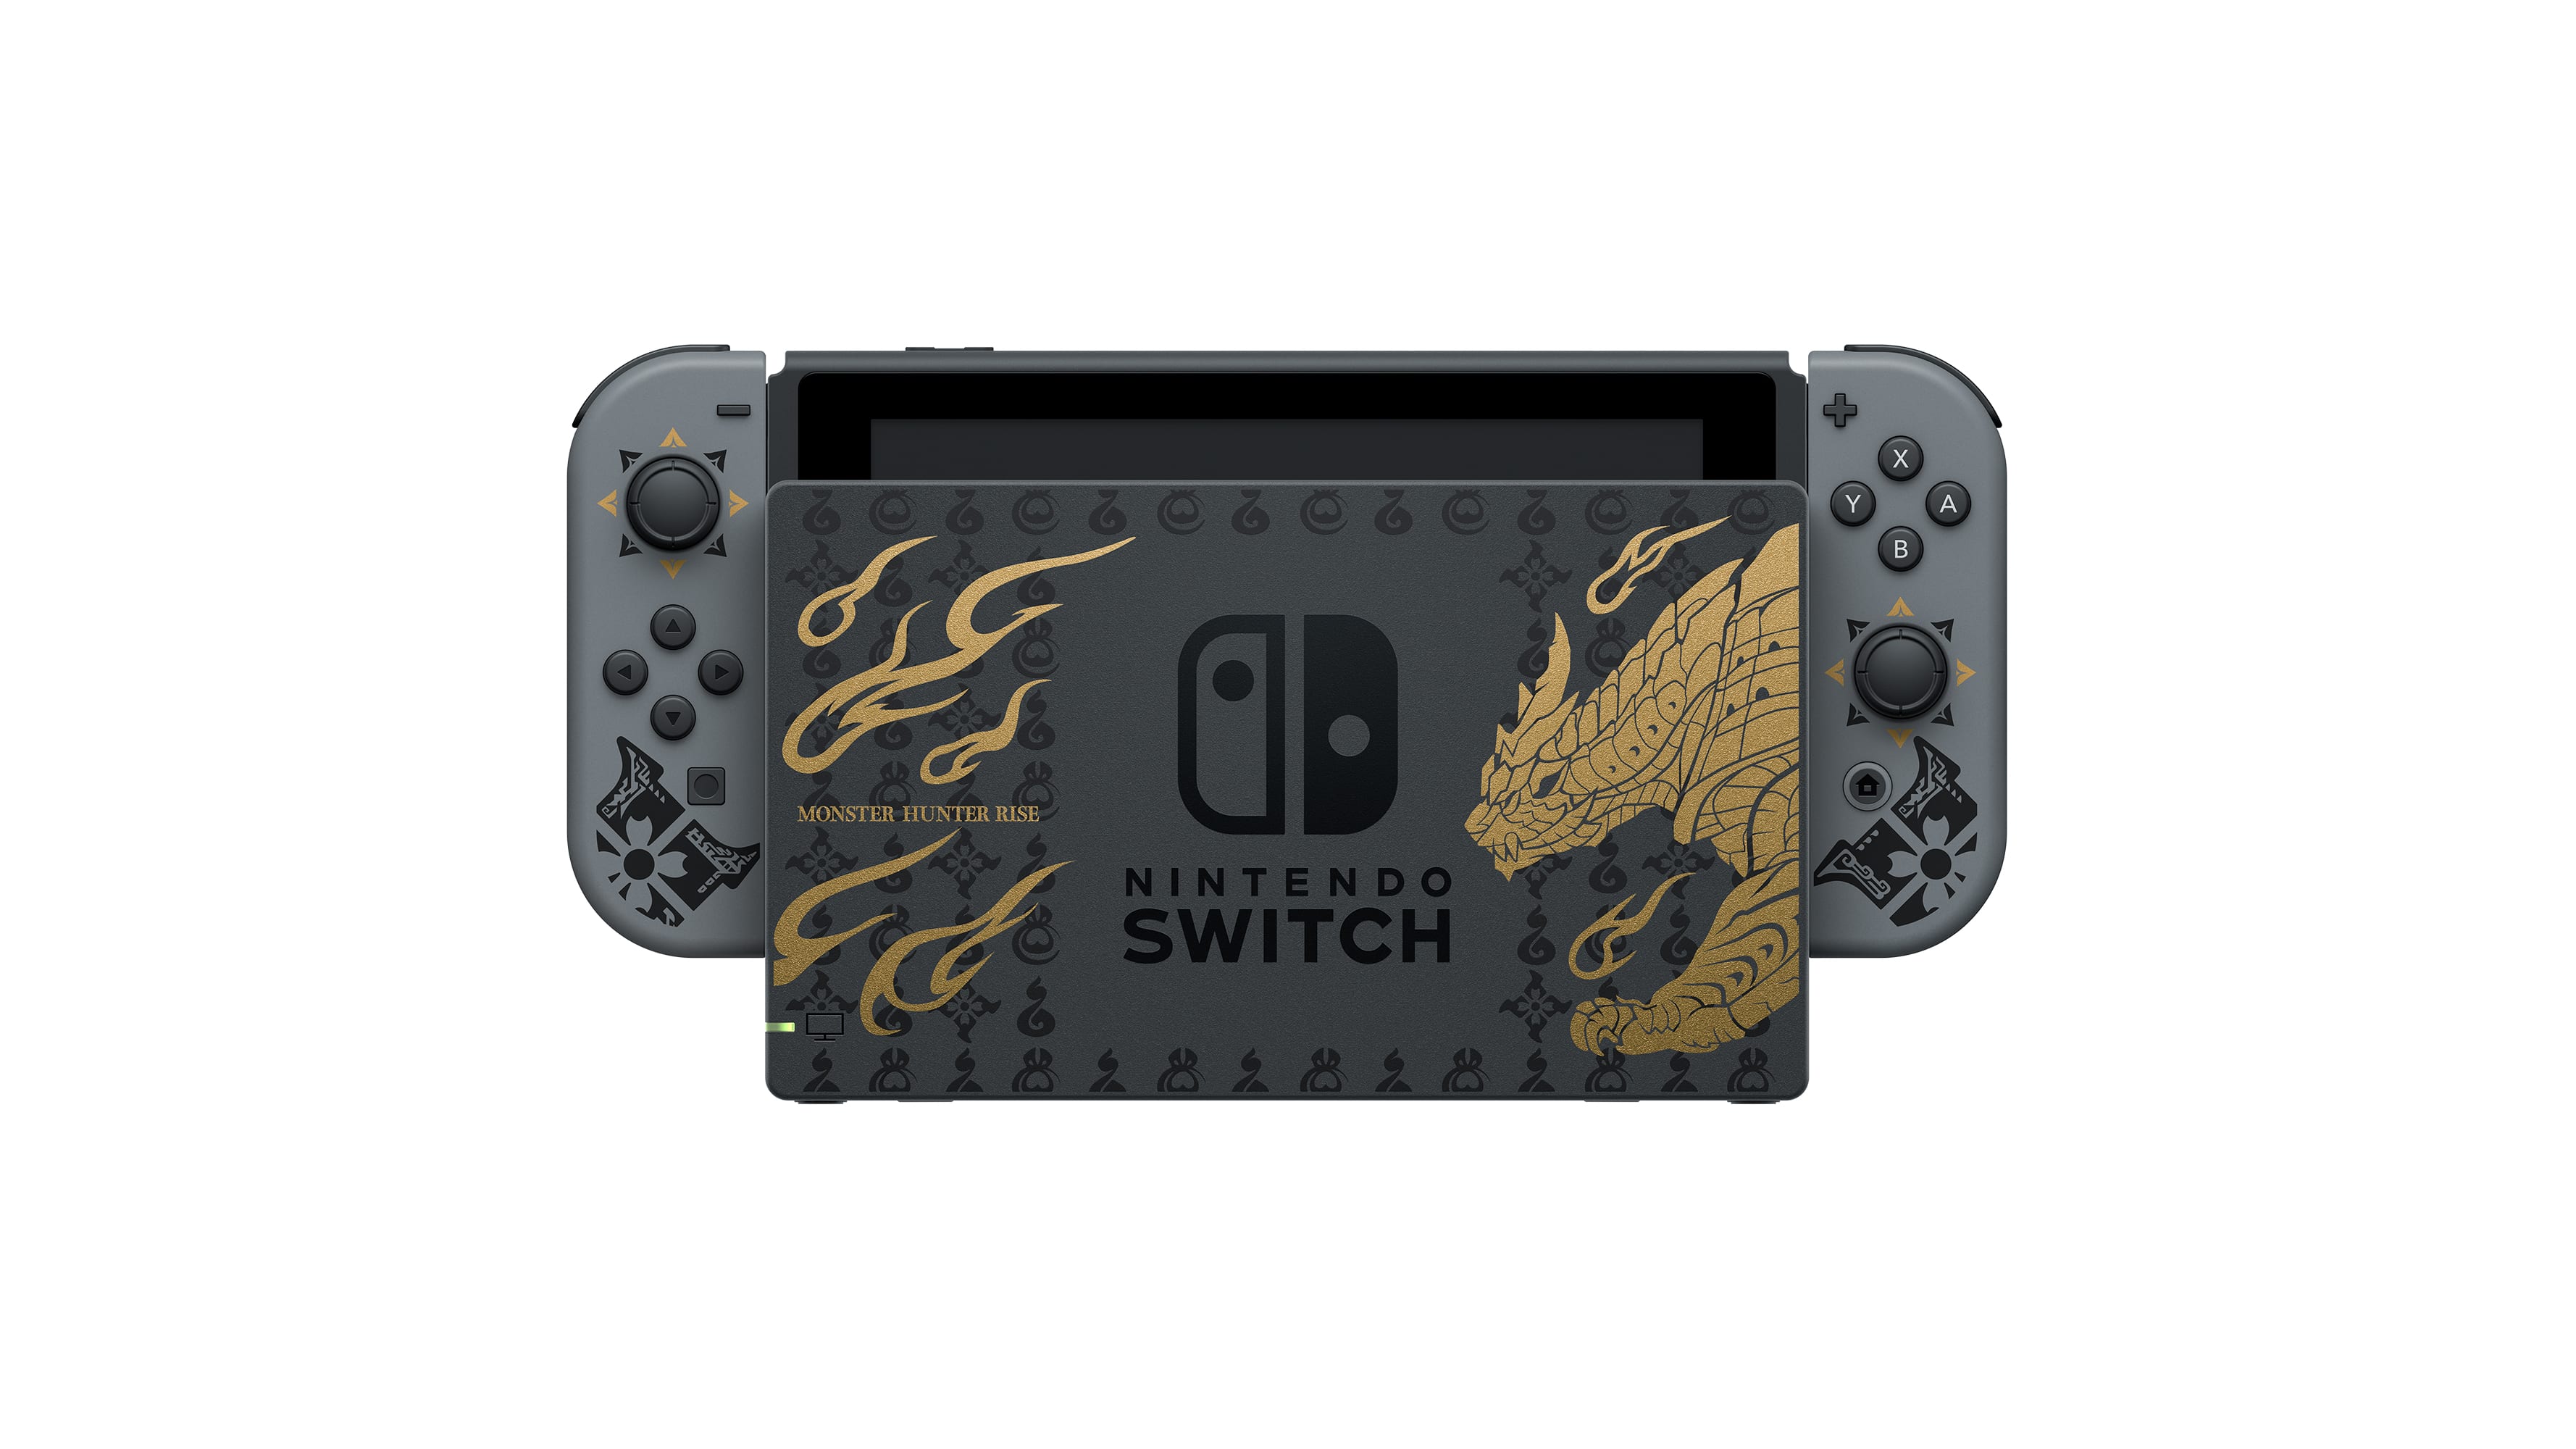 Nintendo Switch MONSTER HUNTER RISE Deluxe Edition system 3